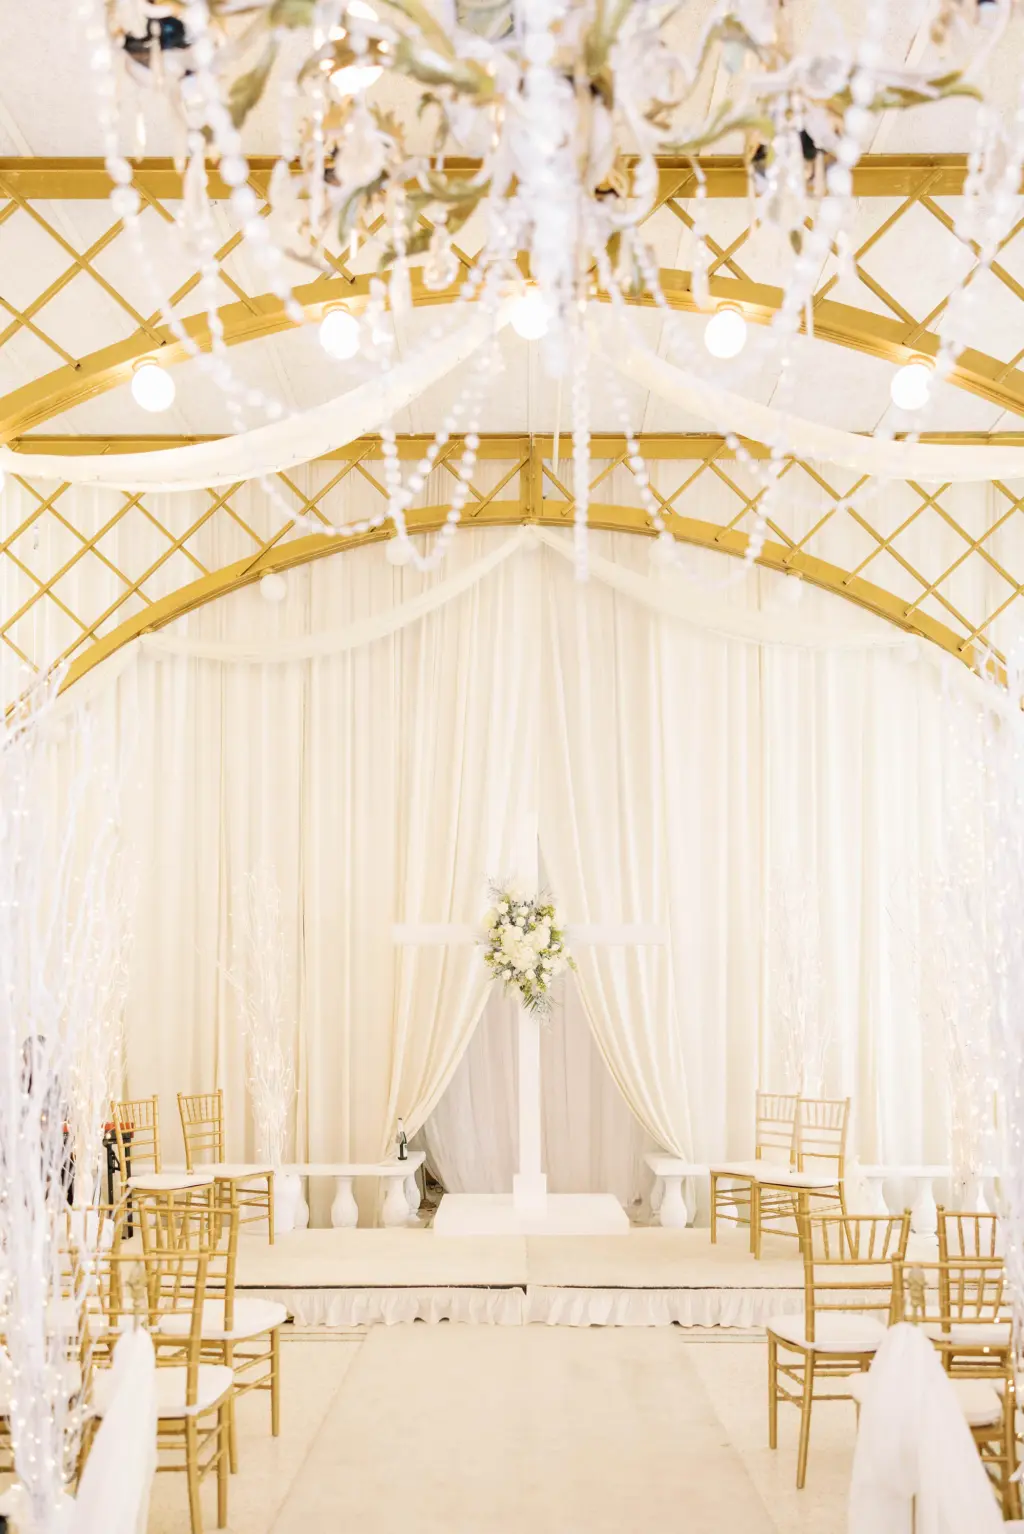 White and Gold Wedding Ceremony Altar Inspiration | Clearwater Venue Kapok Special Events